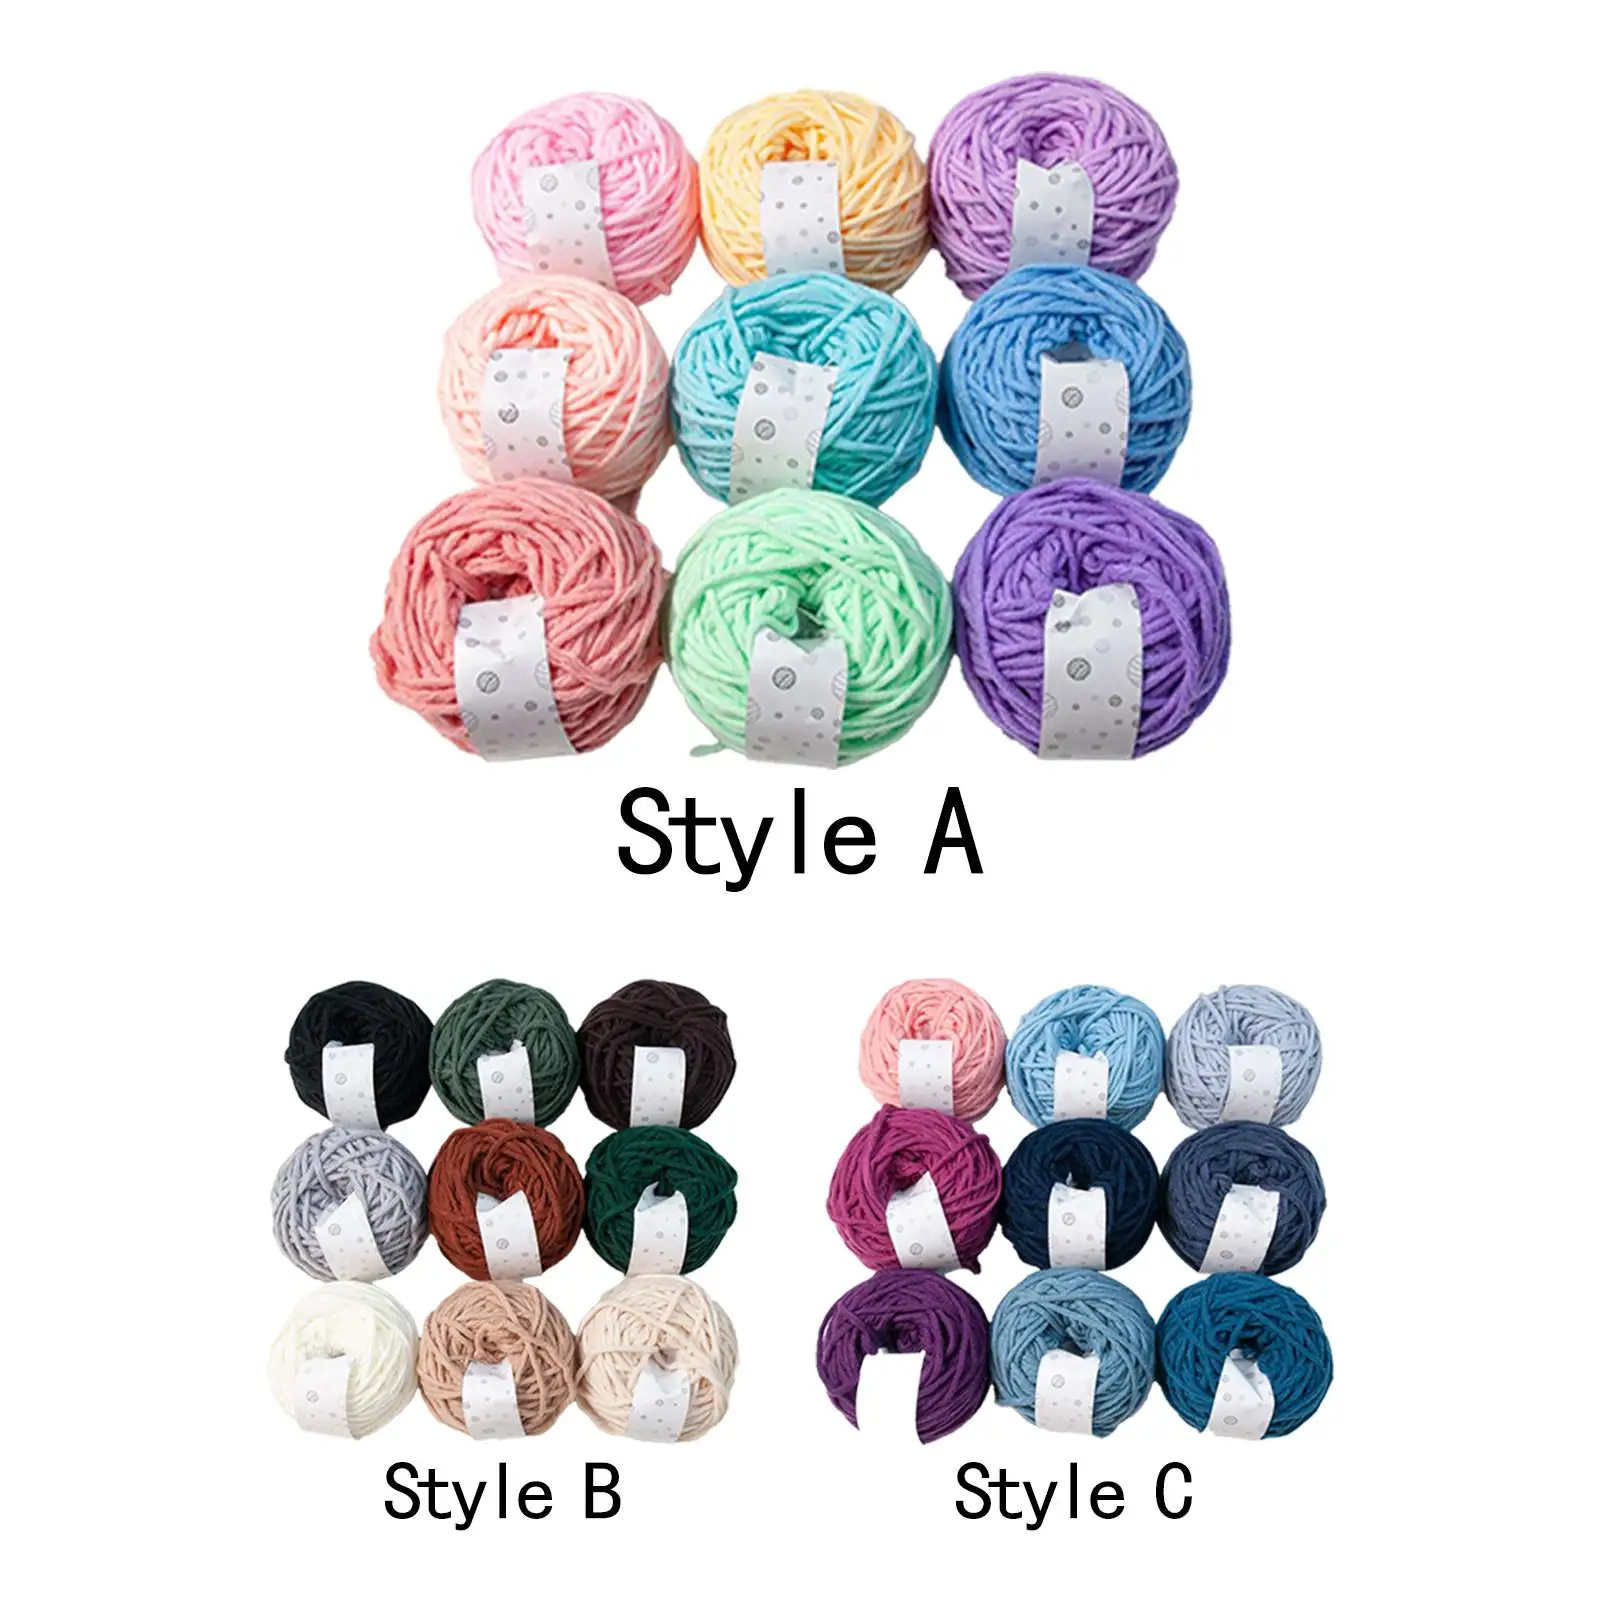 Beginners Crochet Yarn Multifunction Crafts Crochet Projects Colorful Knitting Yarn for Carpets Handbag Scarves Gloves Sewing